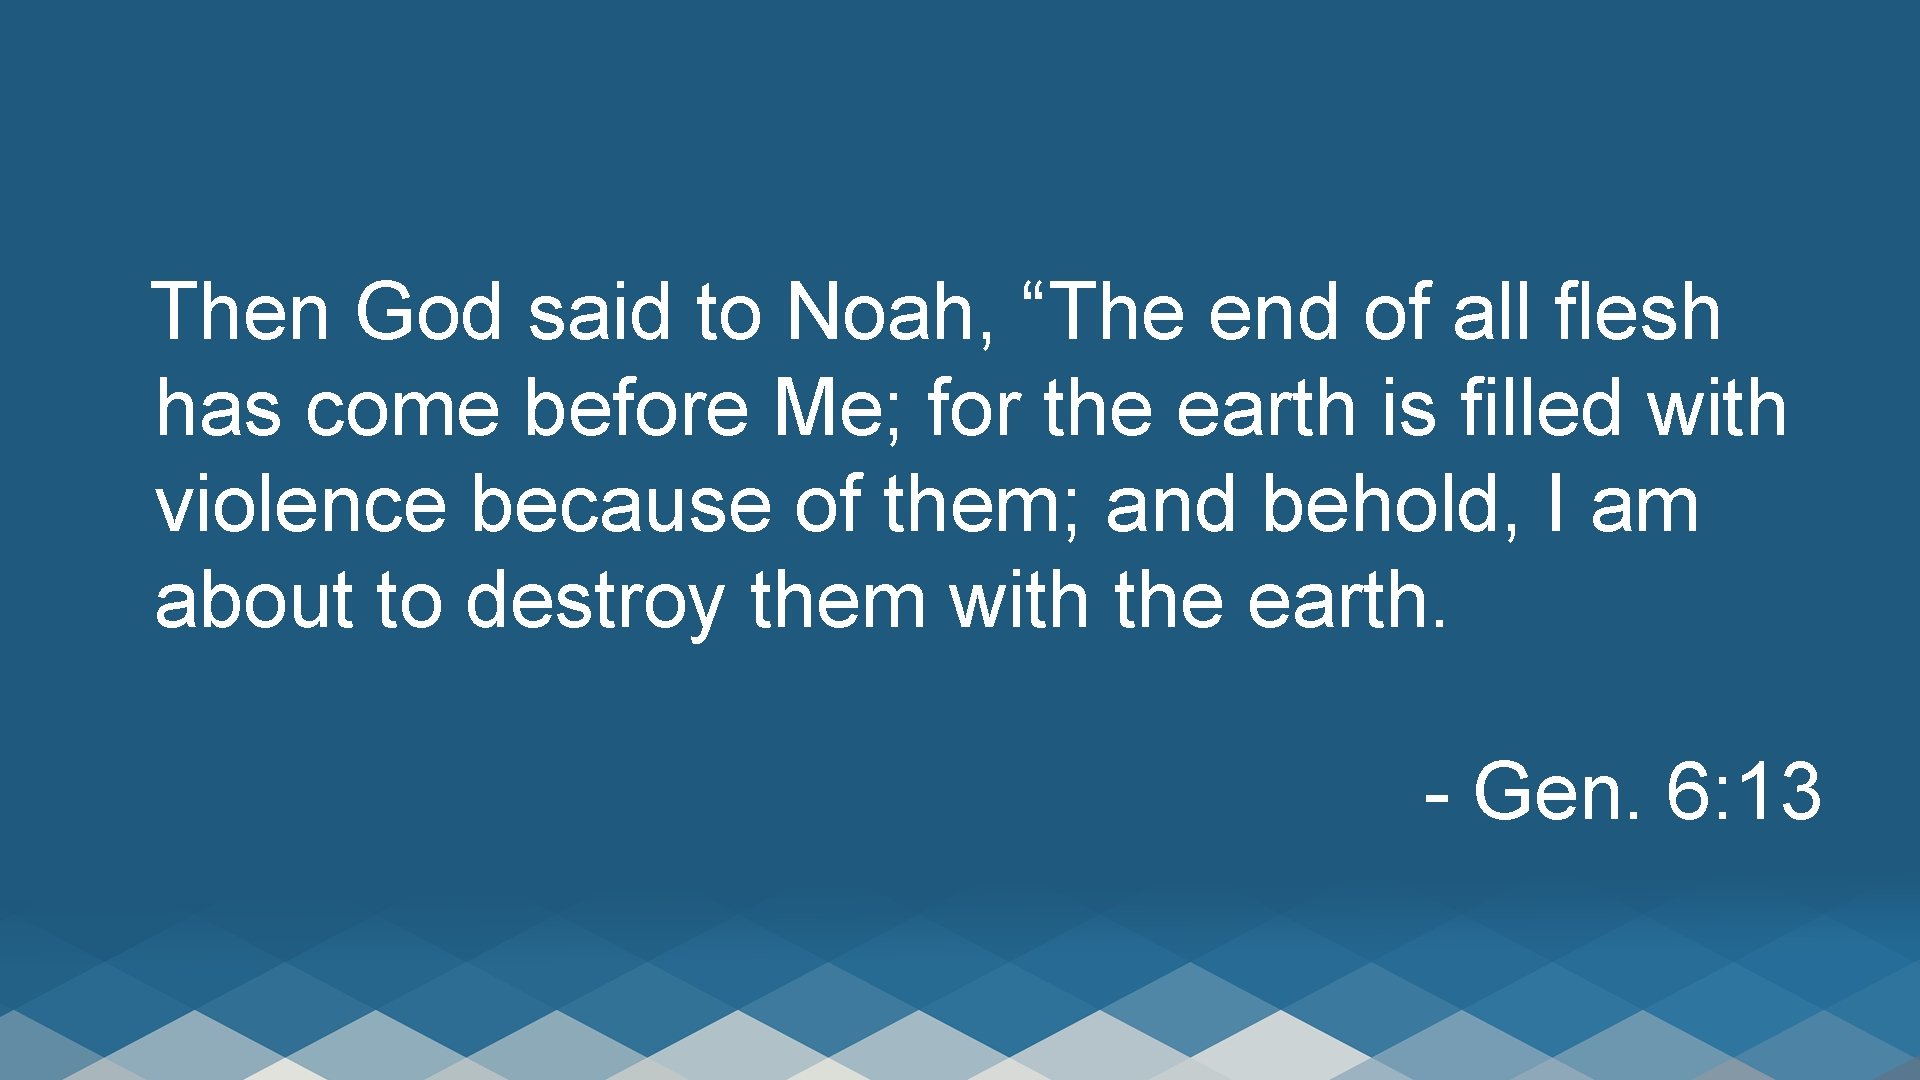 Then God said to Noah, “The end of all flesh has come before Me;